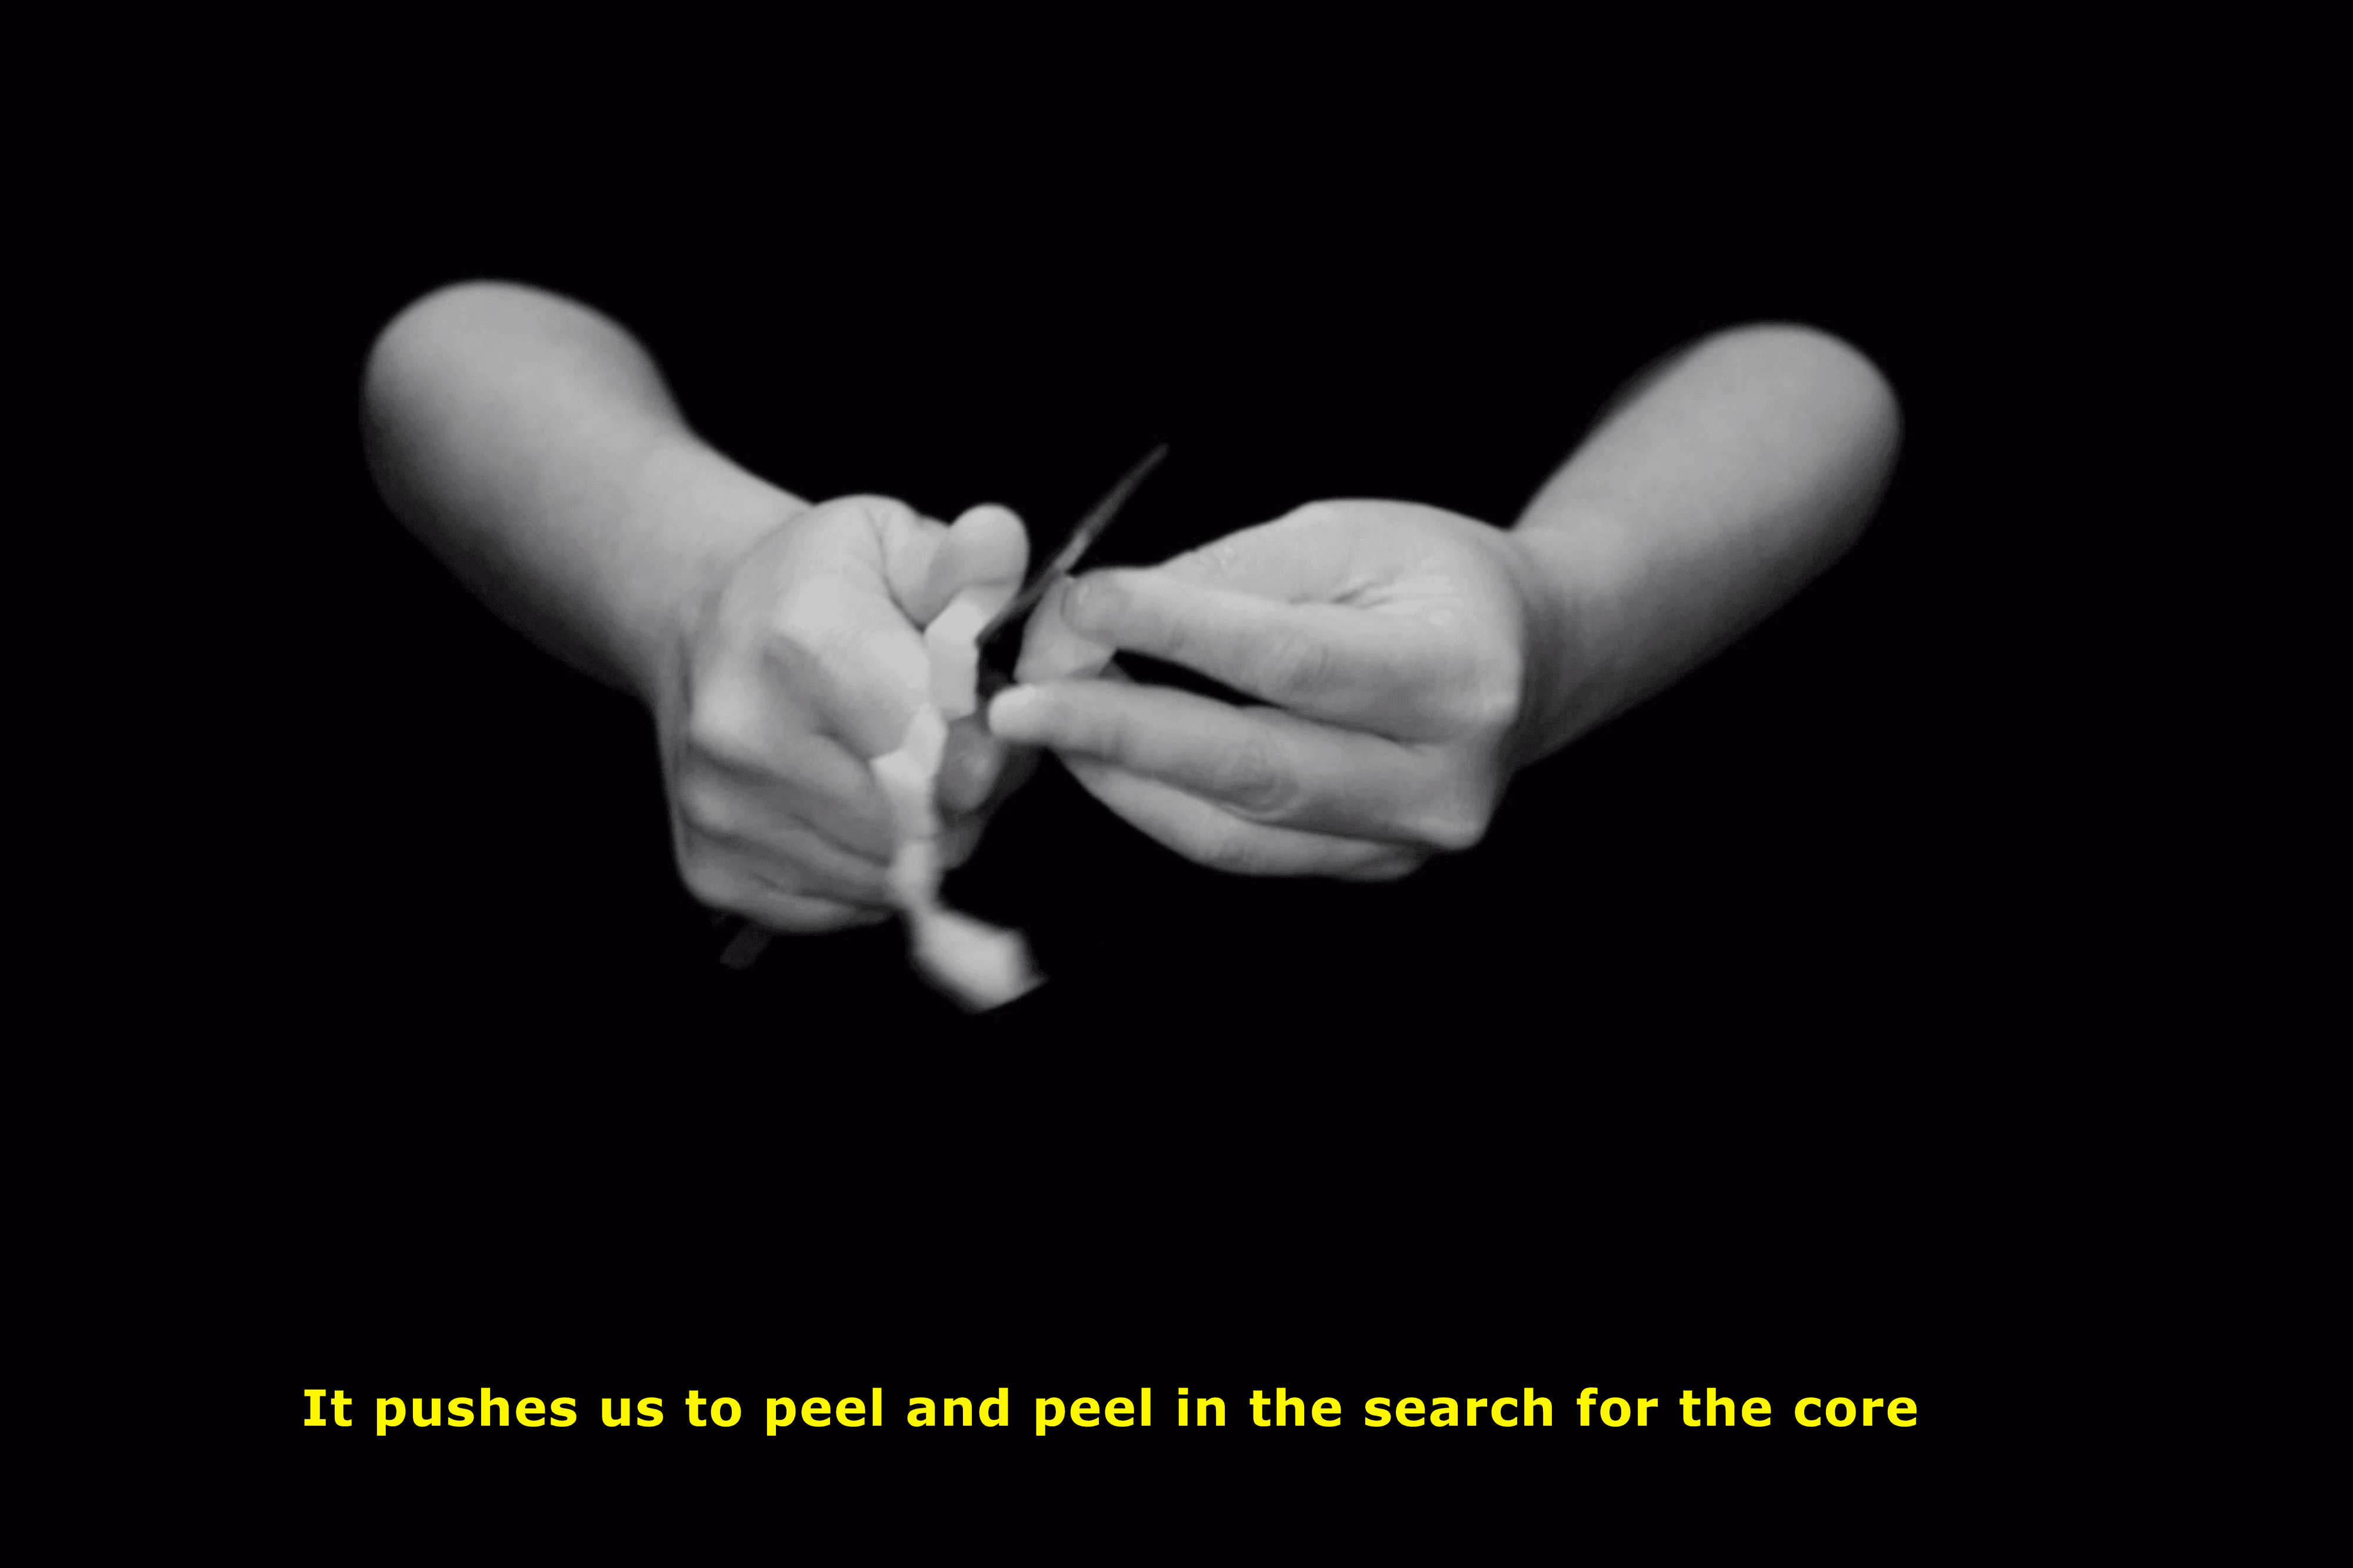 It pushes us to peel and peel in the search for the core